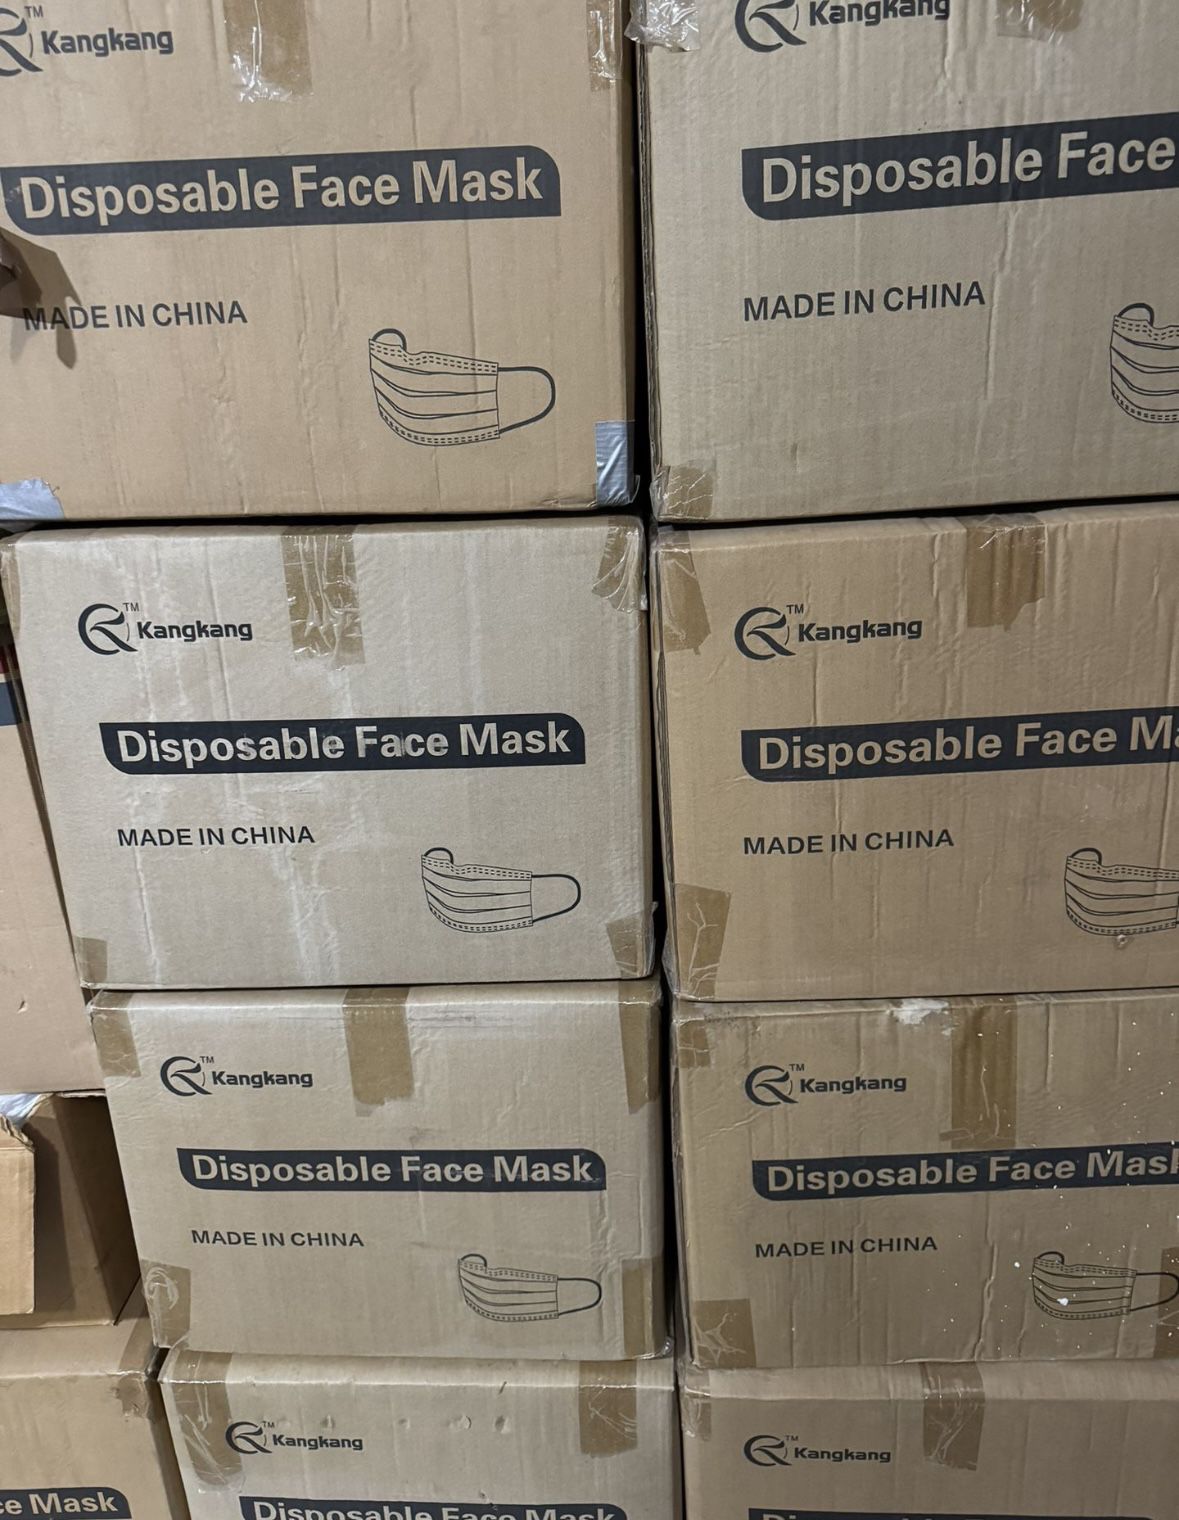 Face Mask 😷 By Cases: Every Case Has 40 Individual Boxes Of 50pcs Each 